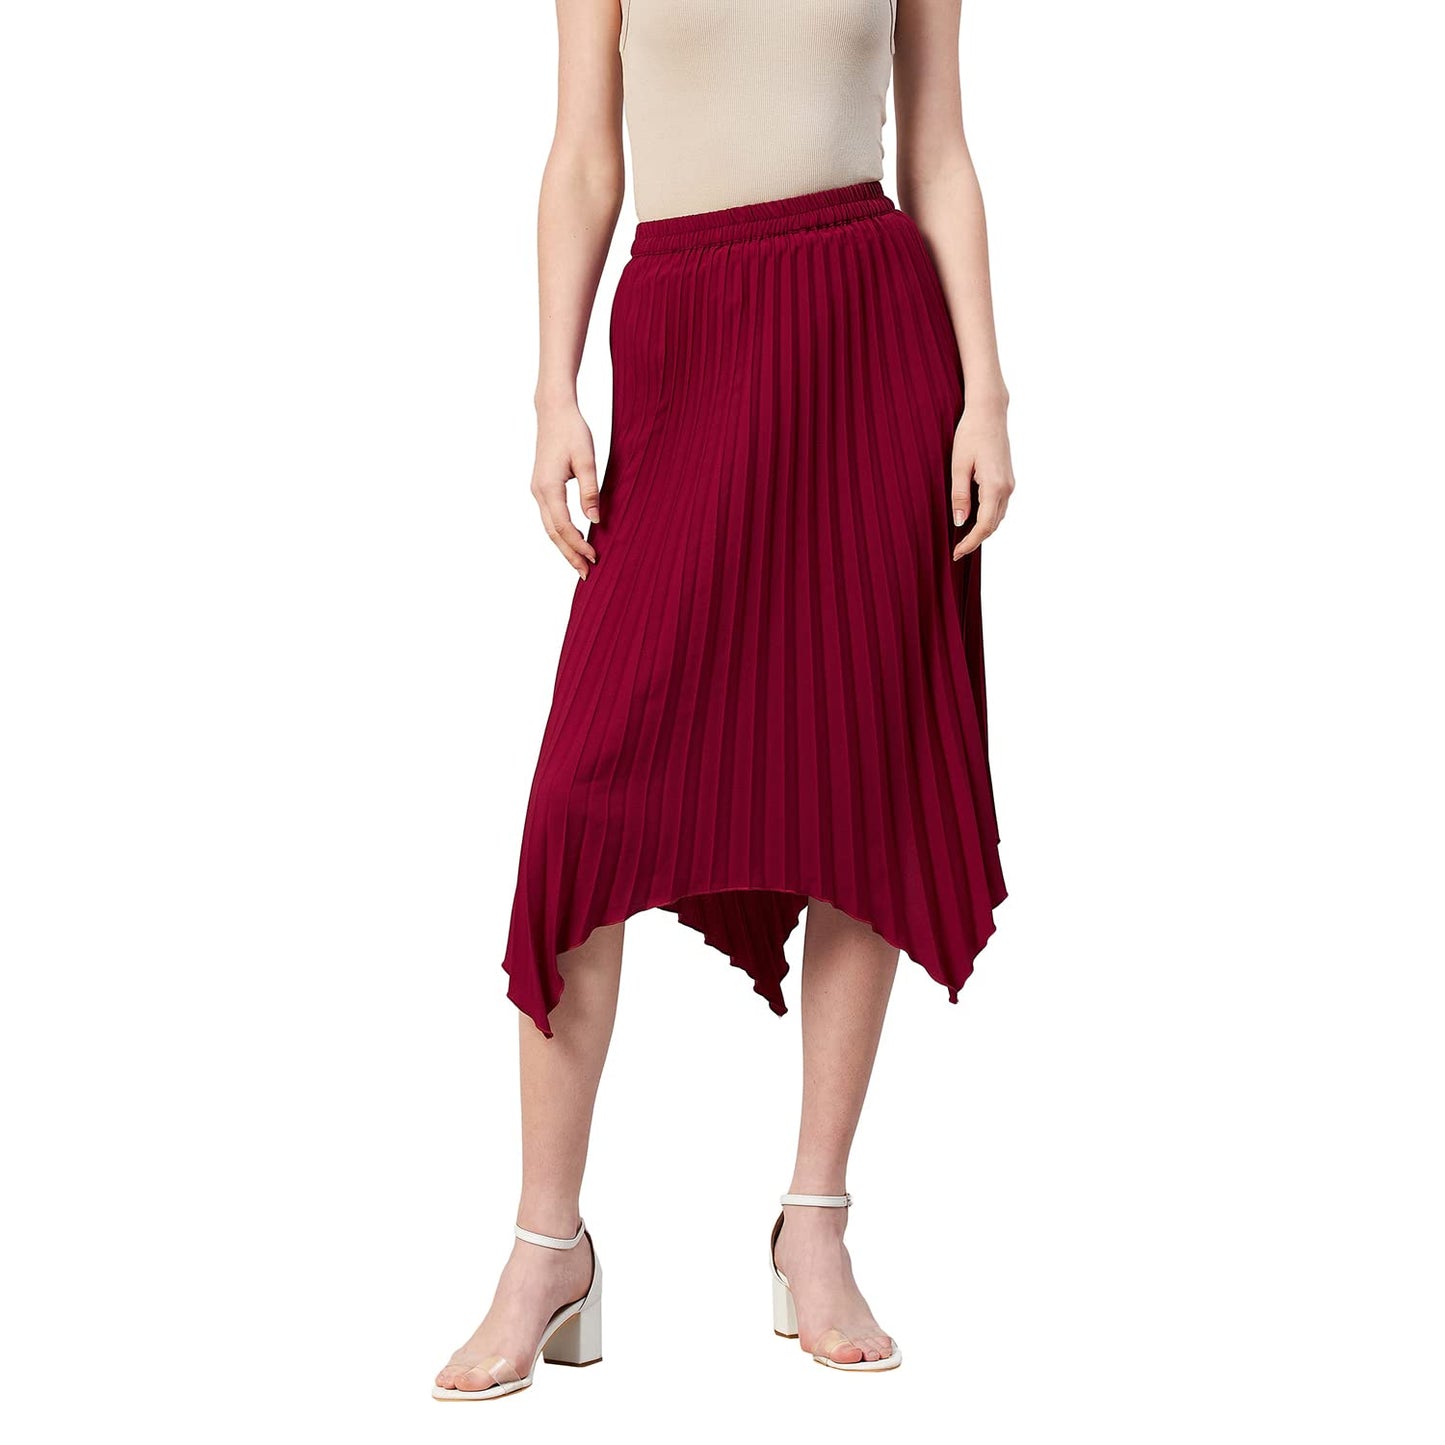 Marie Claire Women Casual Maroon Colour Solid A-Line Skirt